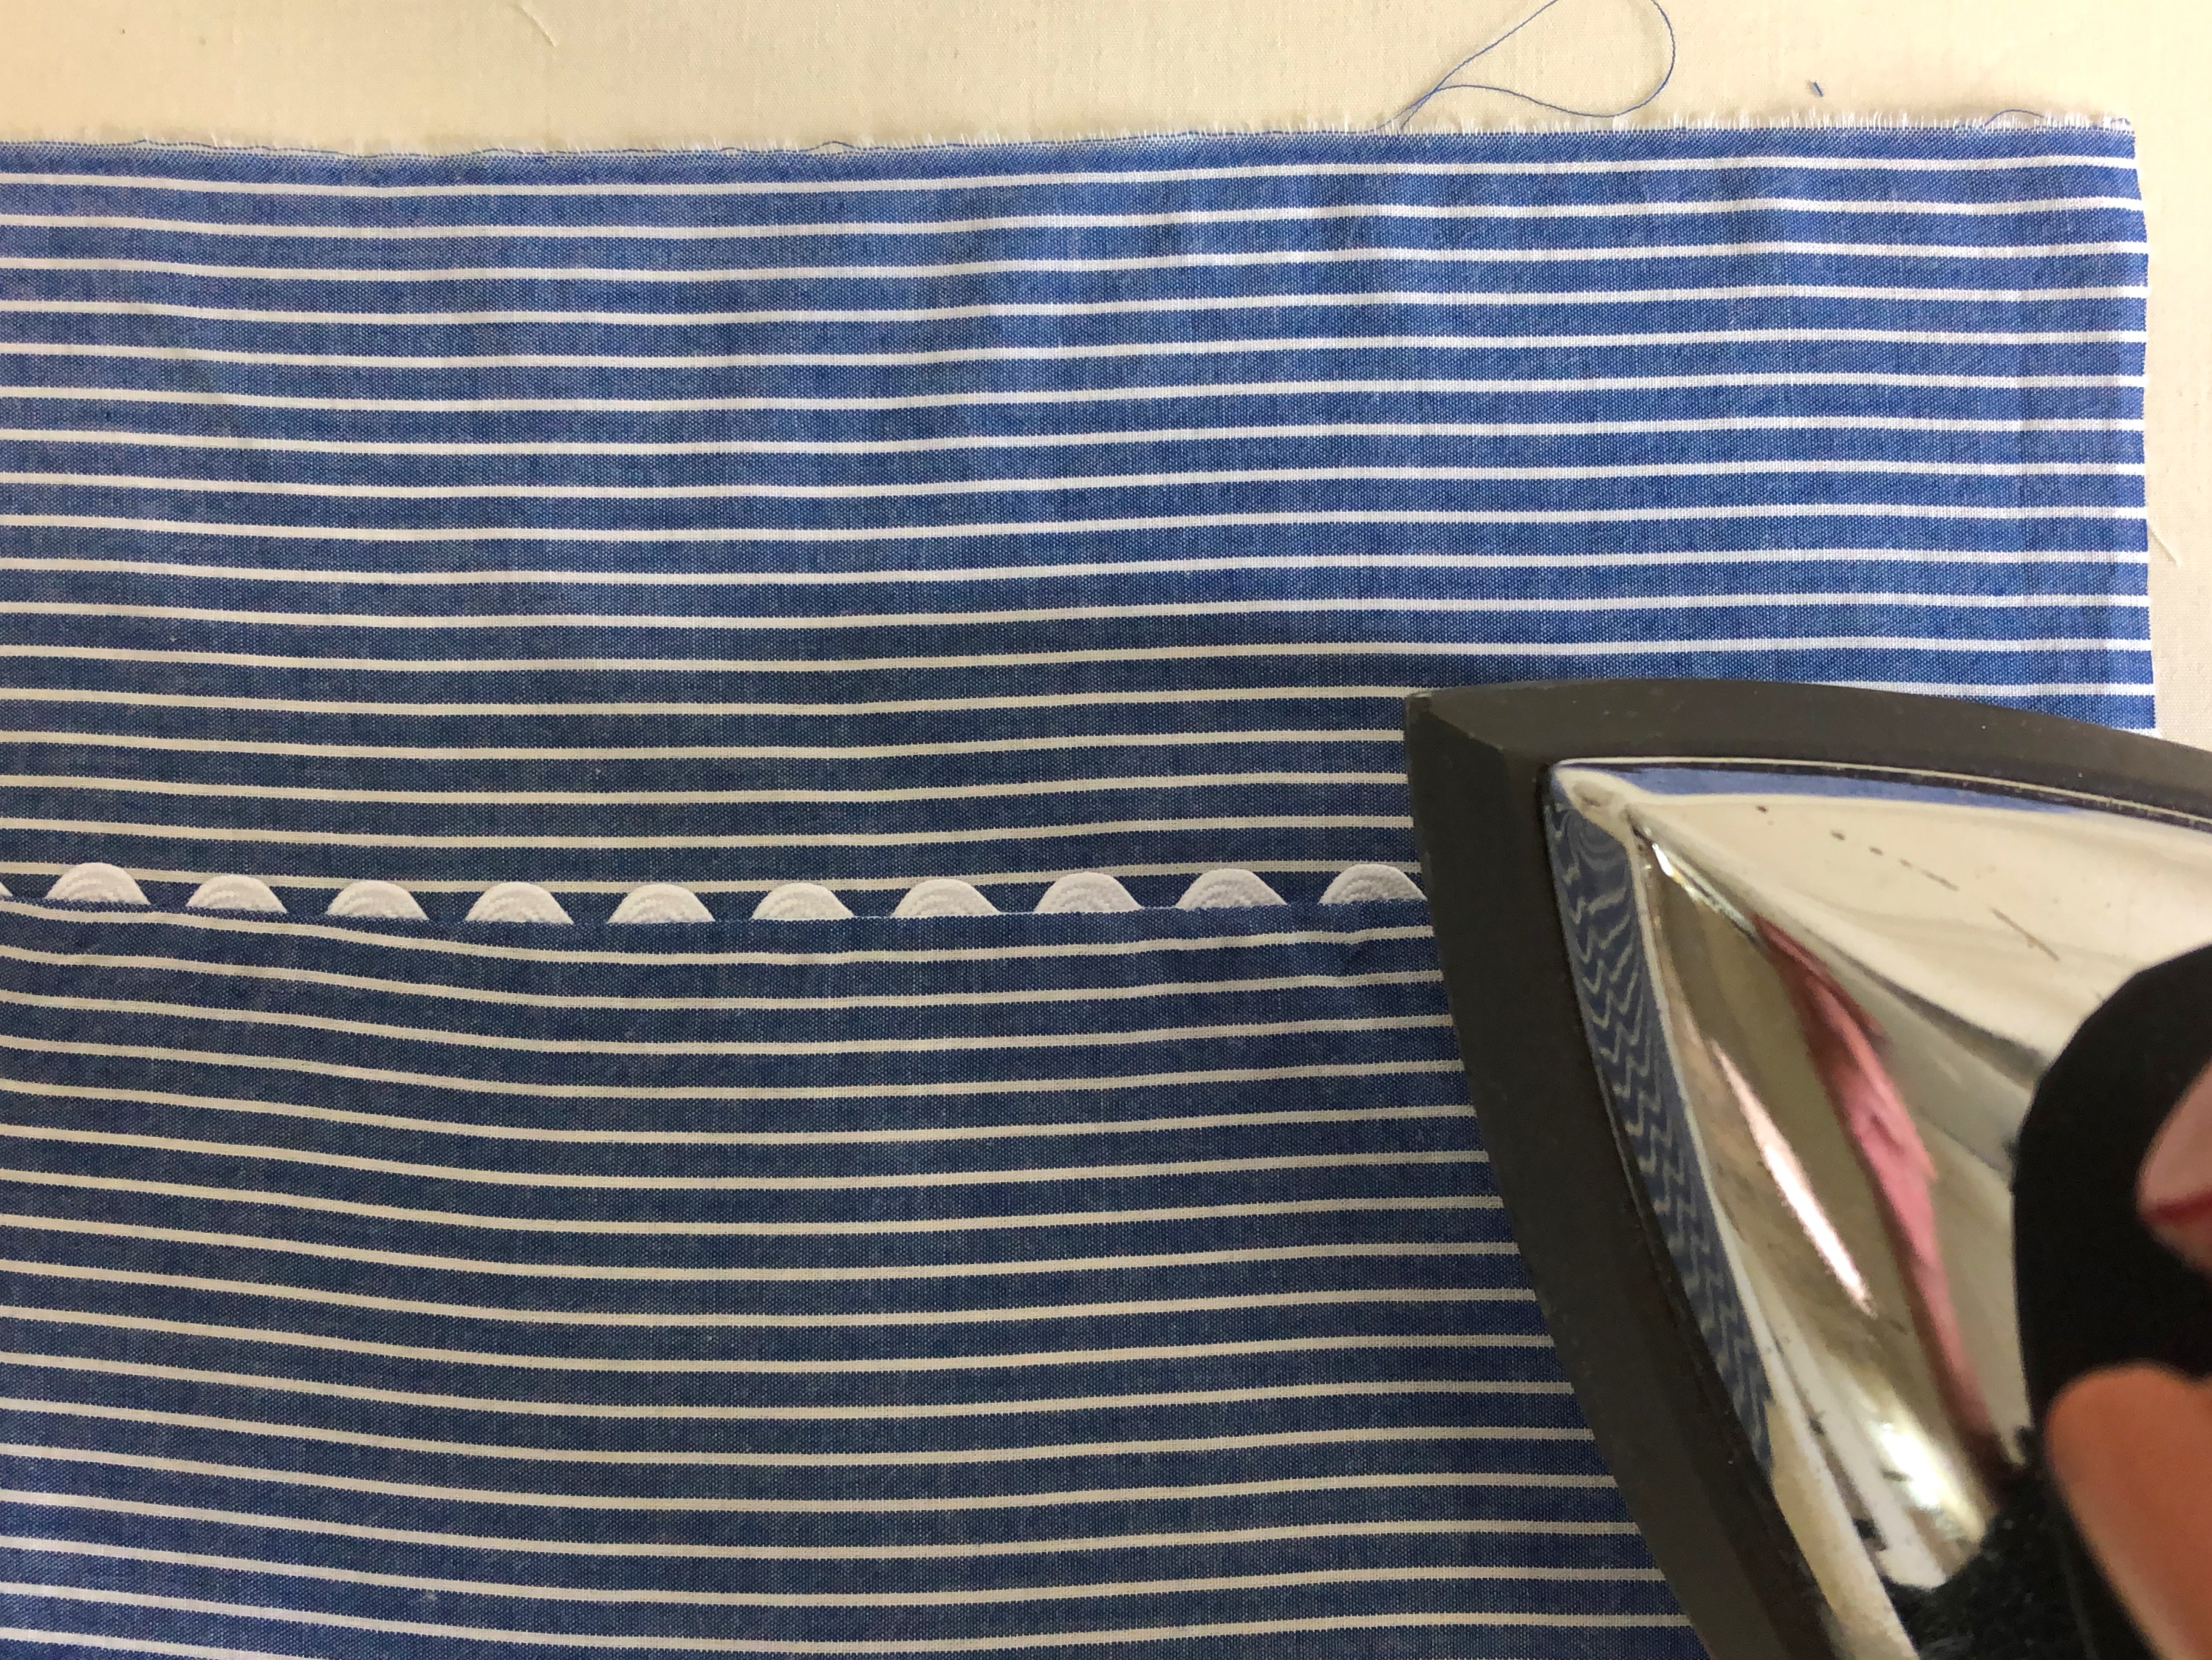 How to sew with rick rack – Our Social Fabric